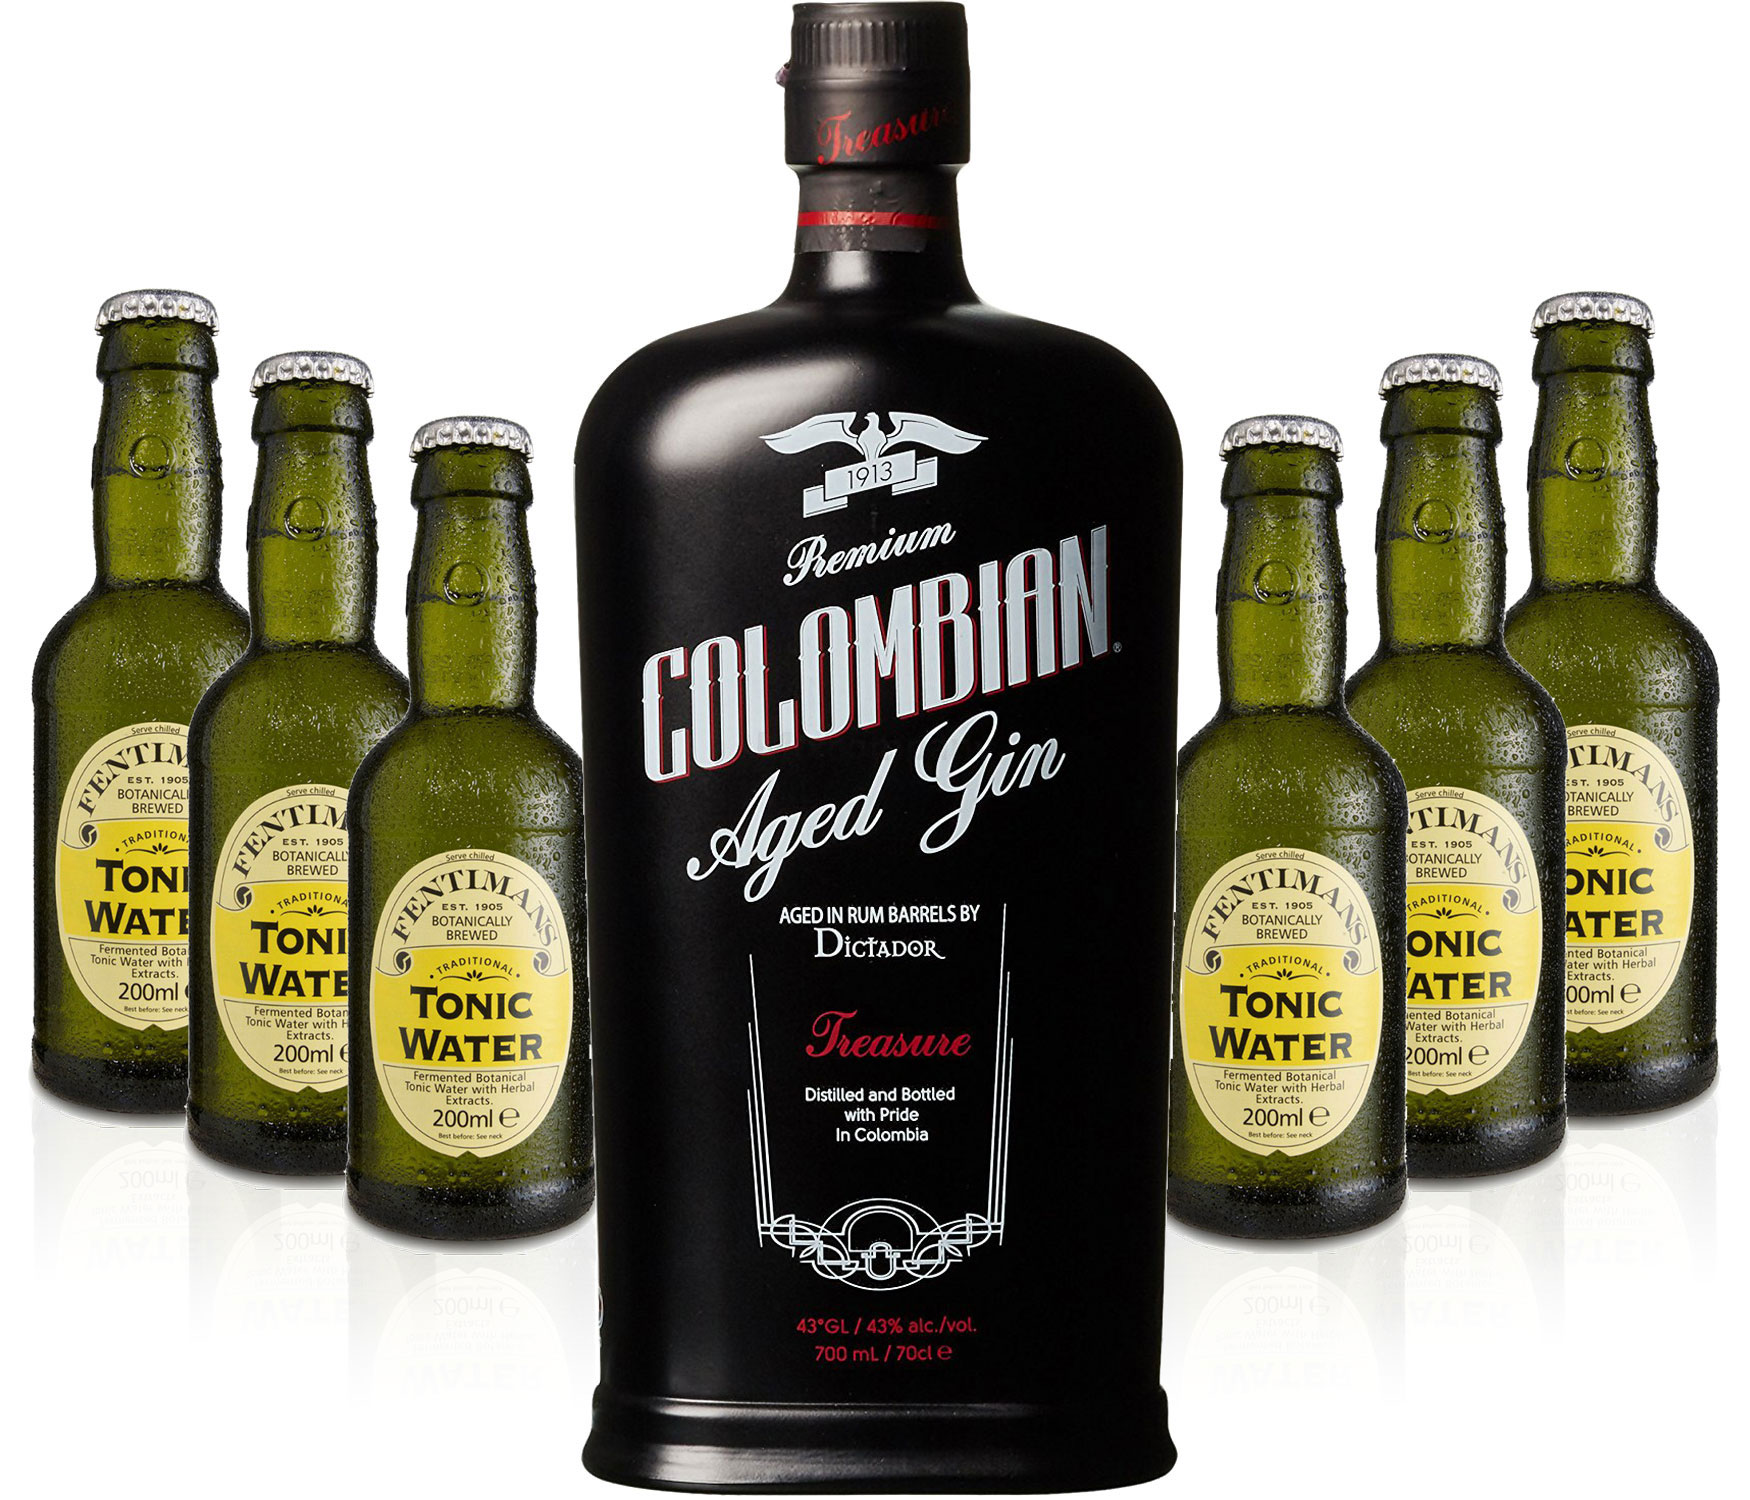 Gin Tonic Set - Dictador Colombian Aged Gin Black 0,7l 700ml (43% Vol) + 6x Fentimans Tonic Water 200ml inkl. Pfand MEHRWEG -[Enthält Sulfite]